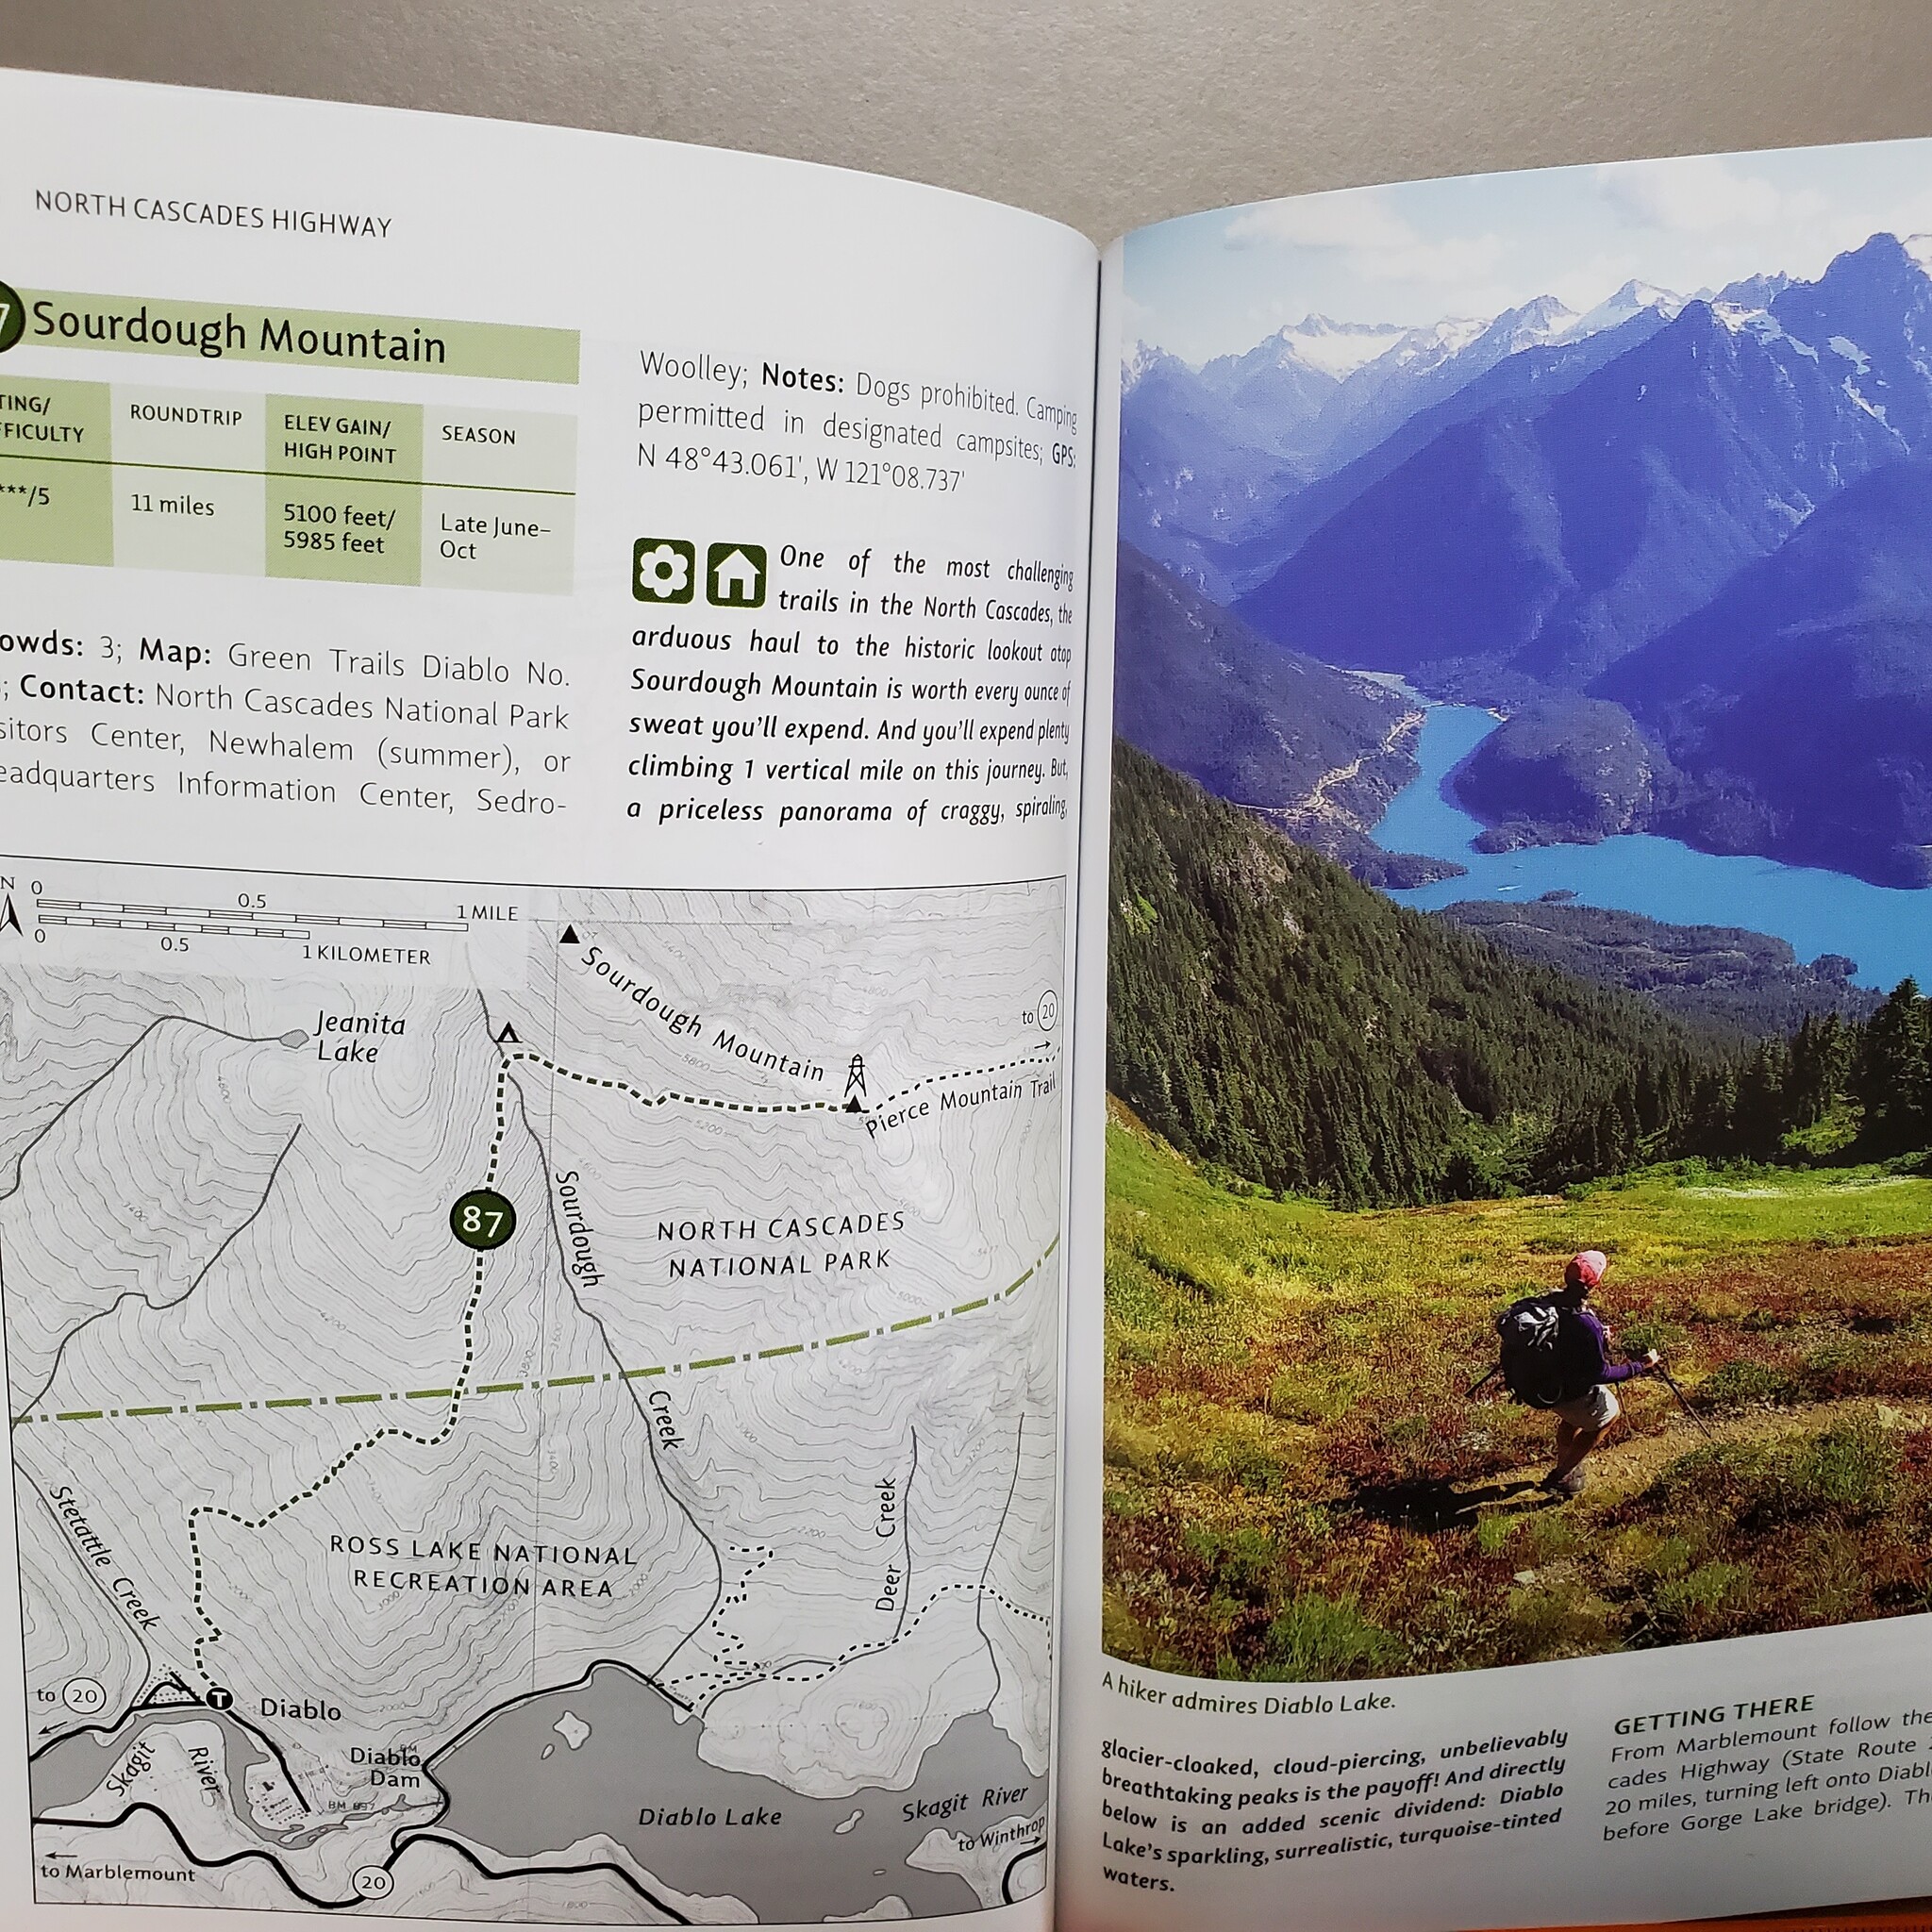 Day Hiking North Cascades 2nd ed